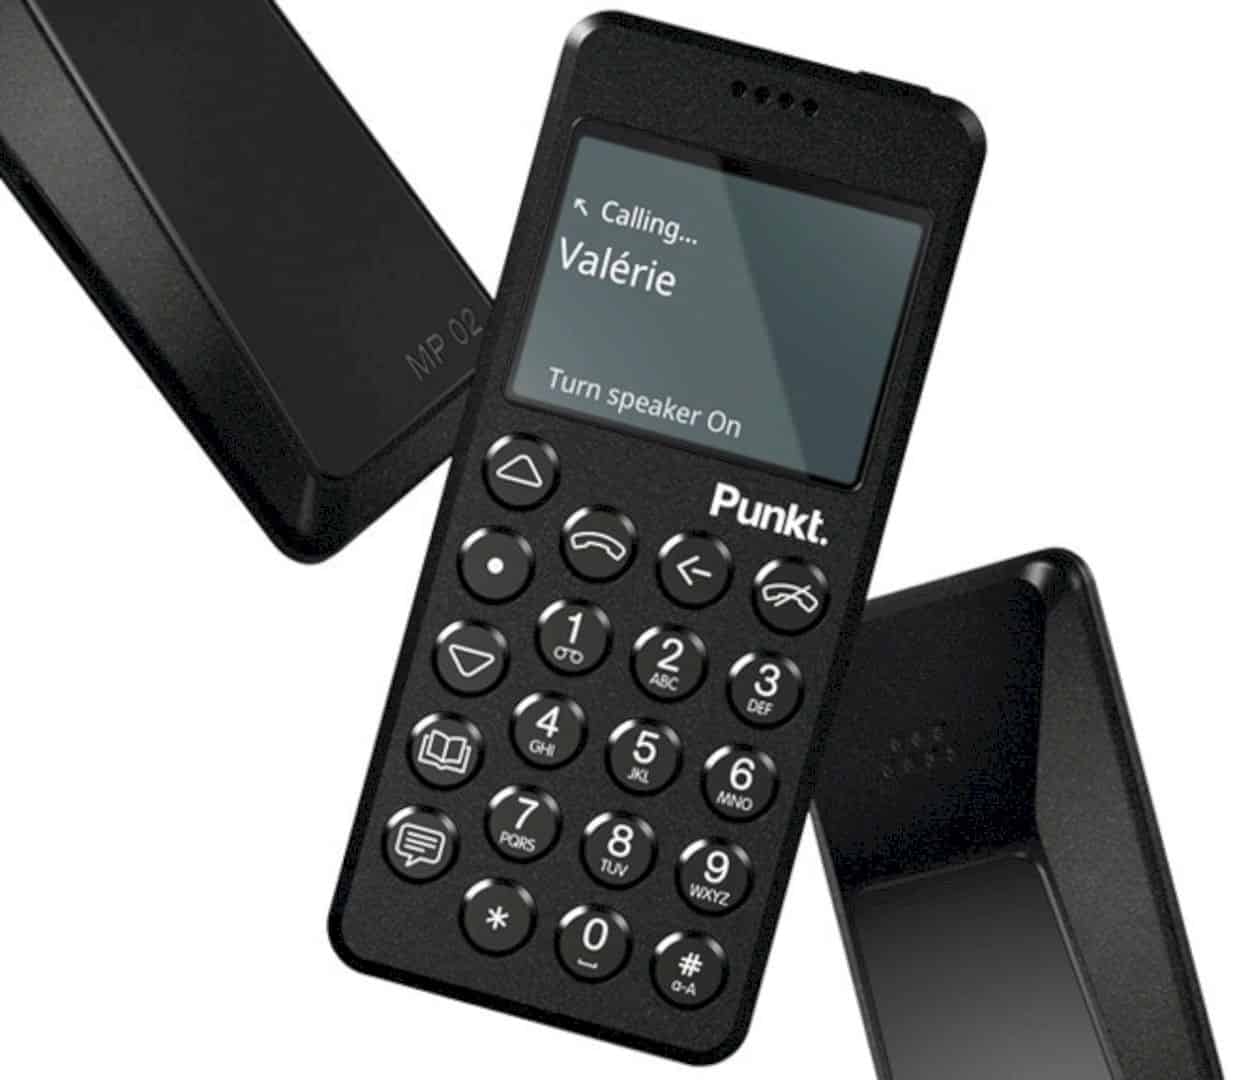 Punkt Mp02 4g Mobile Phone 9